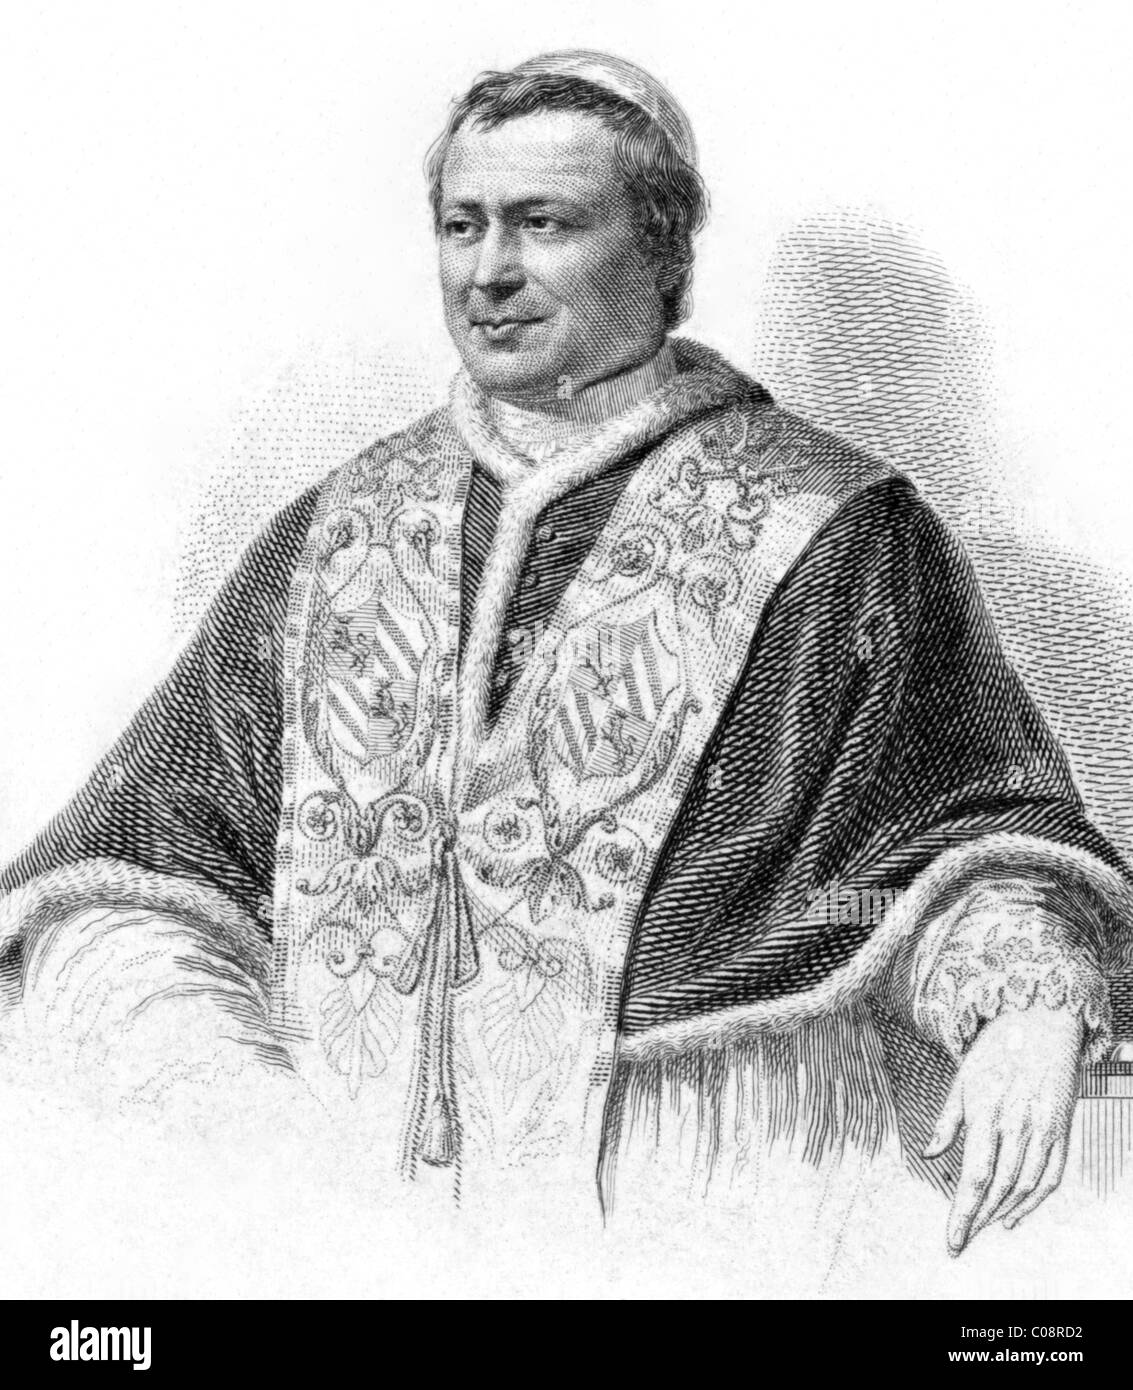 Pope Pius IX (1792-1878) on engraving from the 1800s. Stock Photo